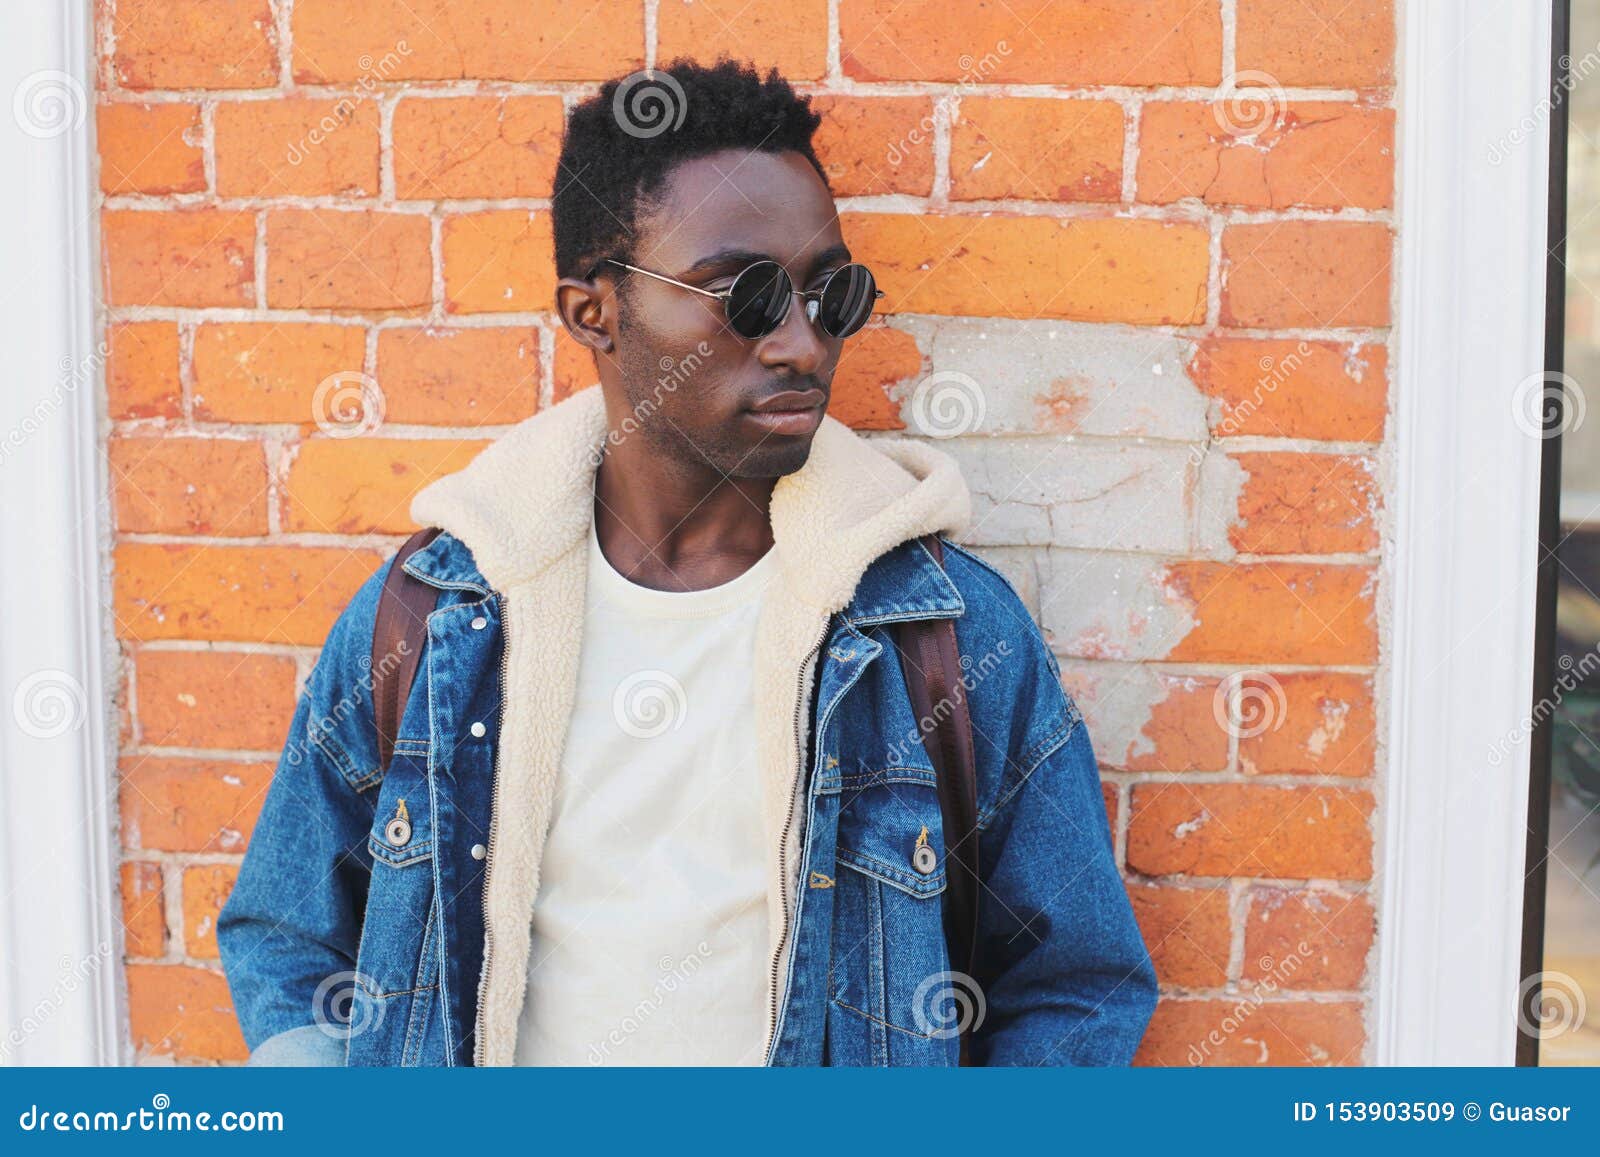 Good Looking Young Man Hairstyle Stylish Blue Denim Jacket Pink Stock Photo  by ©alonesdj 543411746